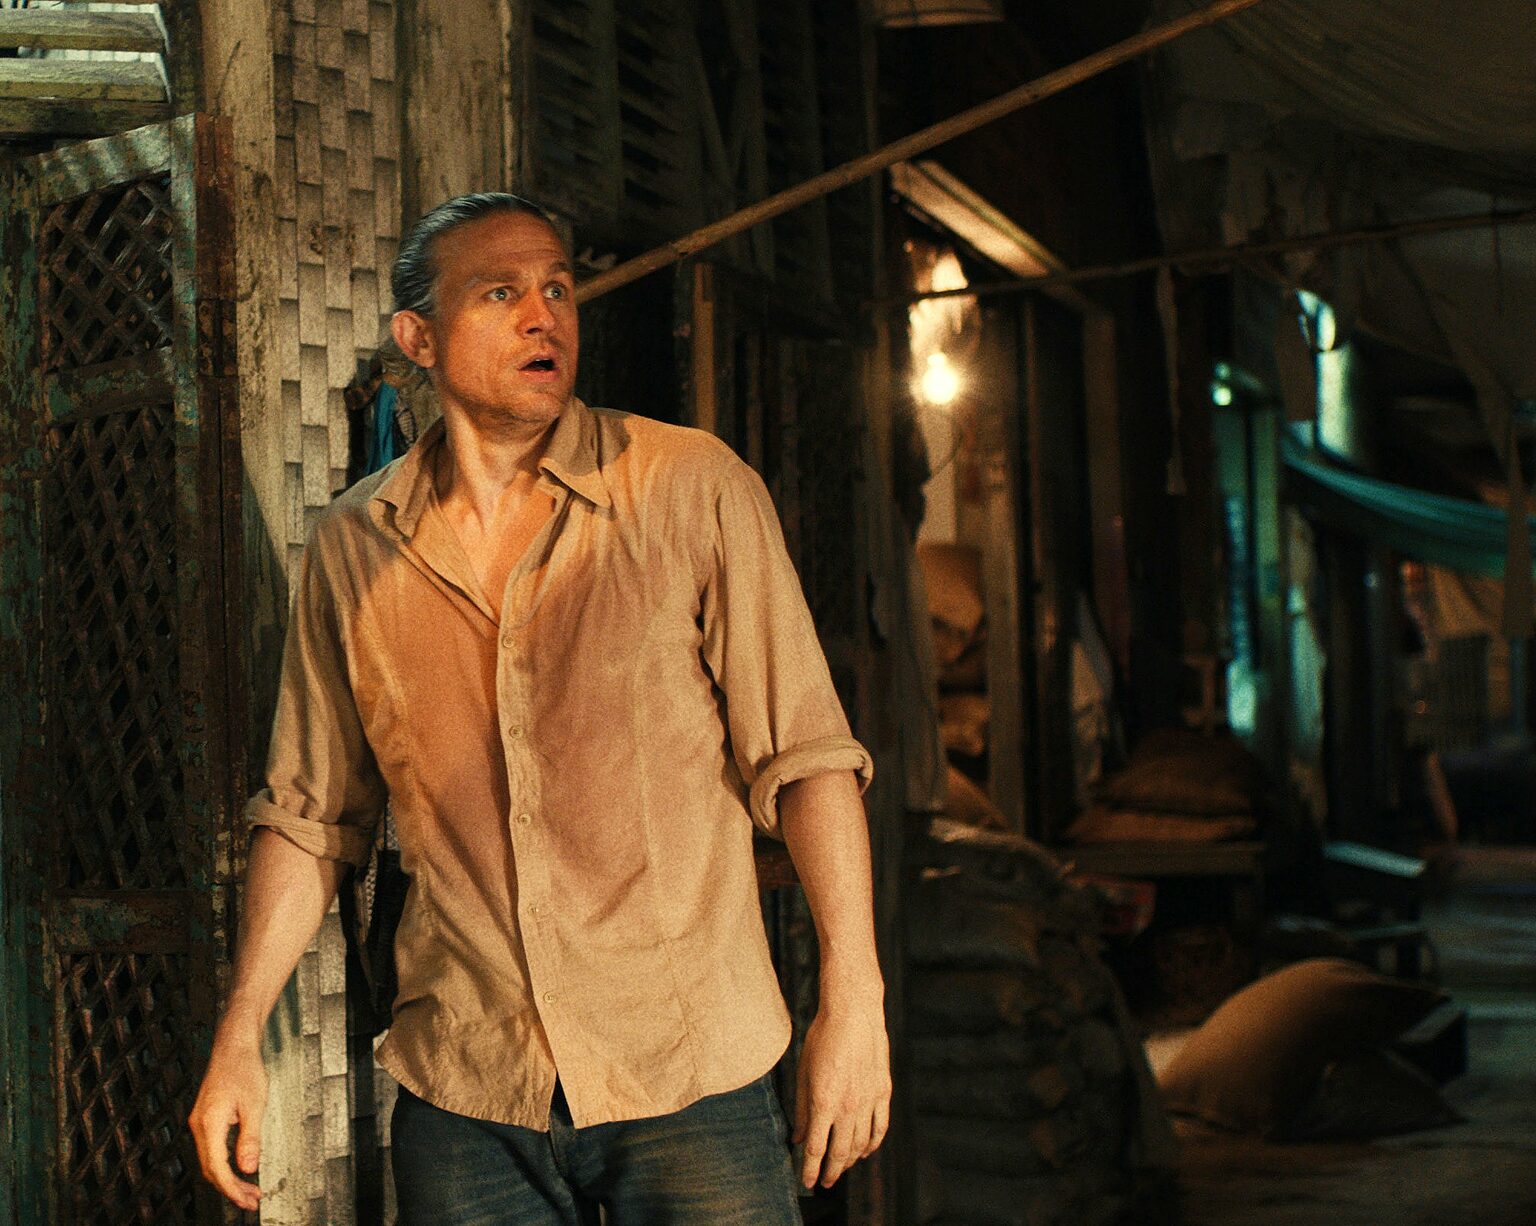 Shantaram recap Apple TV+: Lindsay Ford (played by Charlie Hunnam) realizes it's go time.